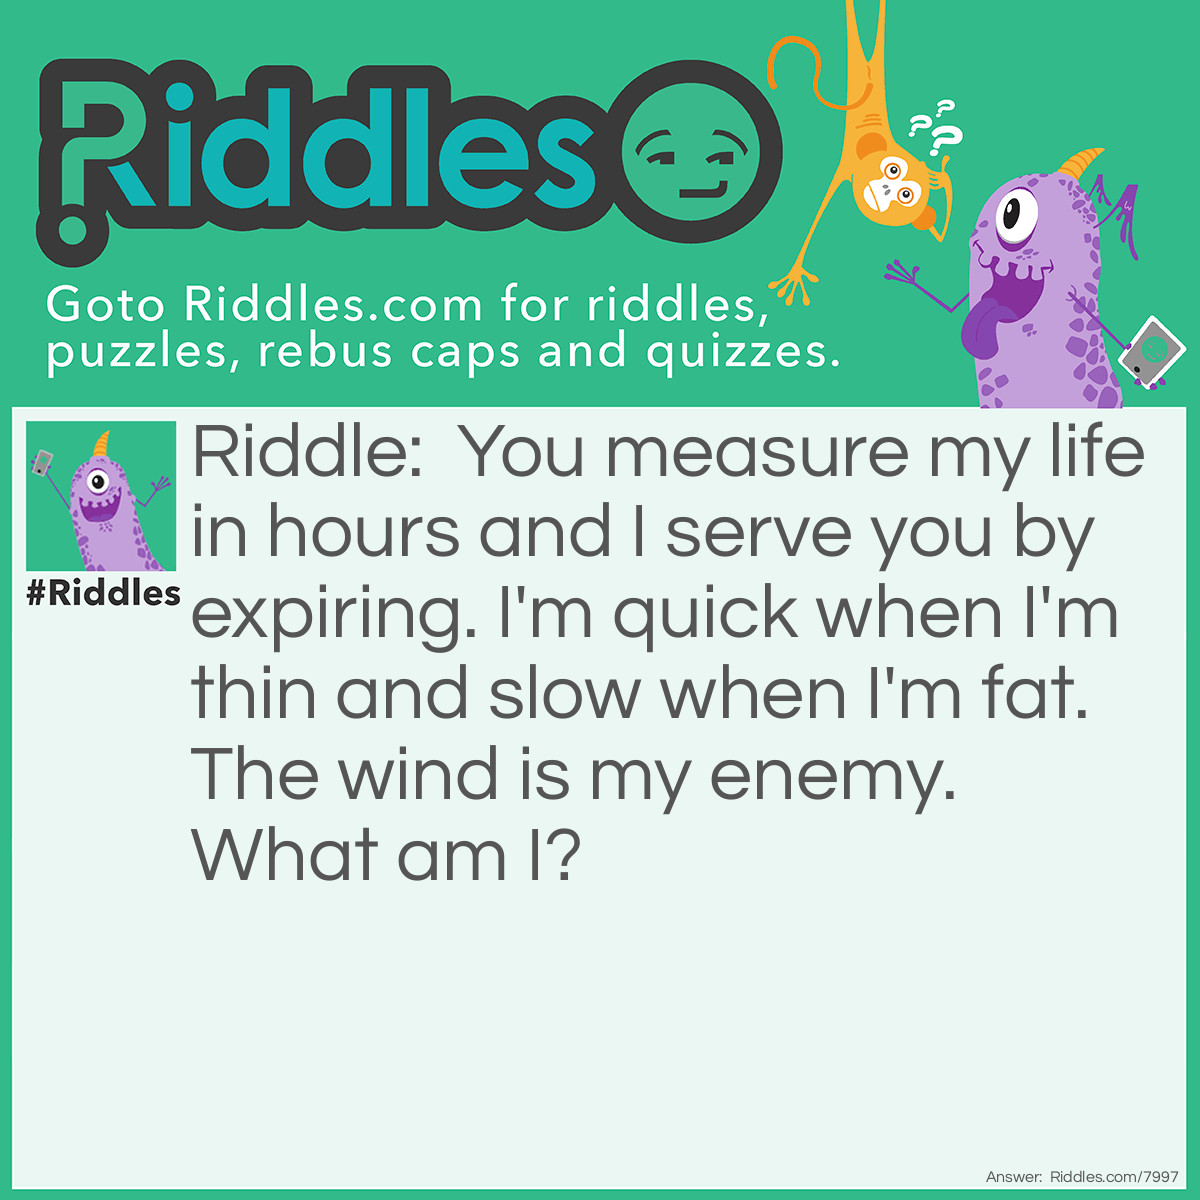 Riddle: You measure my life in hours and I serve you by expiring. I'm quick when I'm thin and slow when I'm fat. The wind is my enemy. What am I? Answer: A candle.